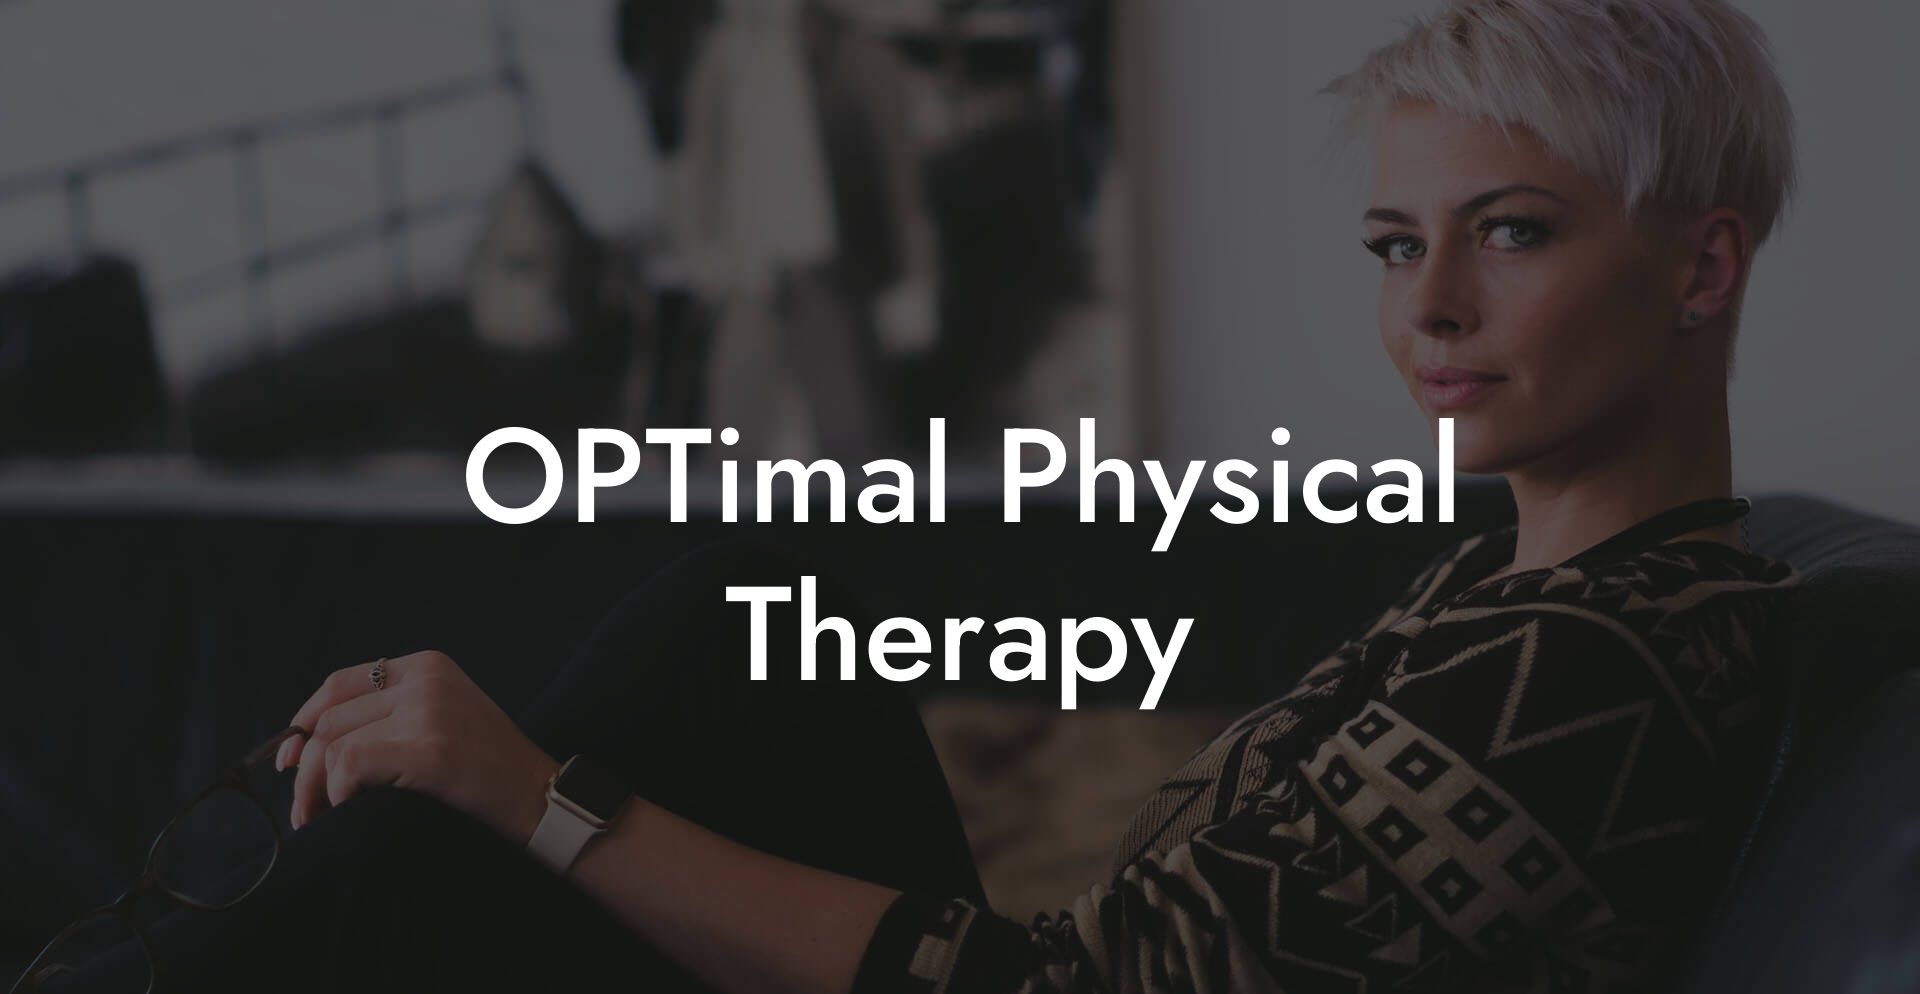 OPTimal Physical Therapy